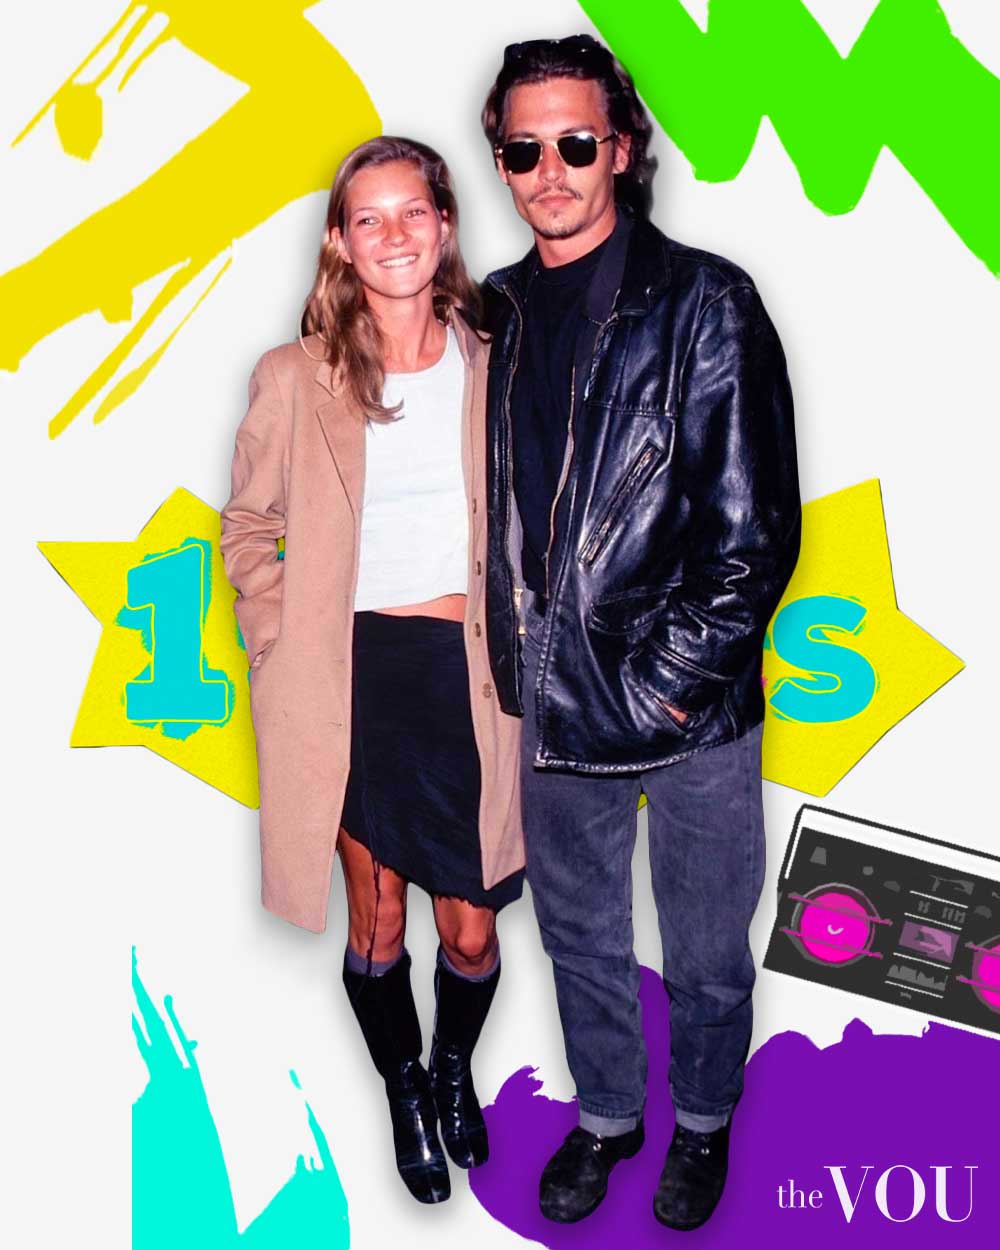 Johnny Depp and Kate Moss 90s couple outfits to wear to a 90s party